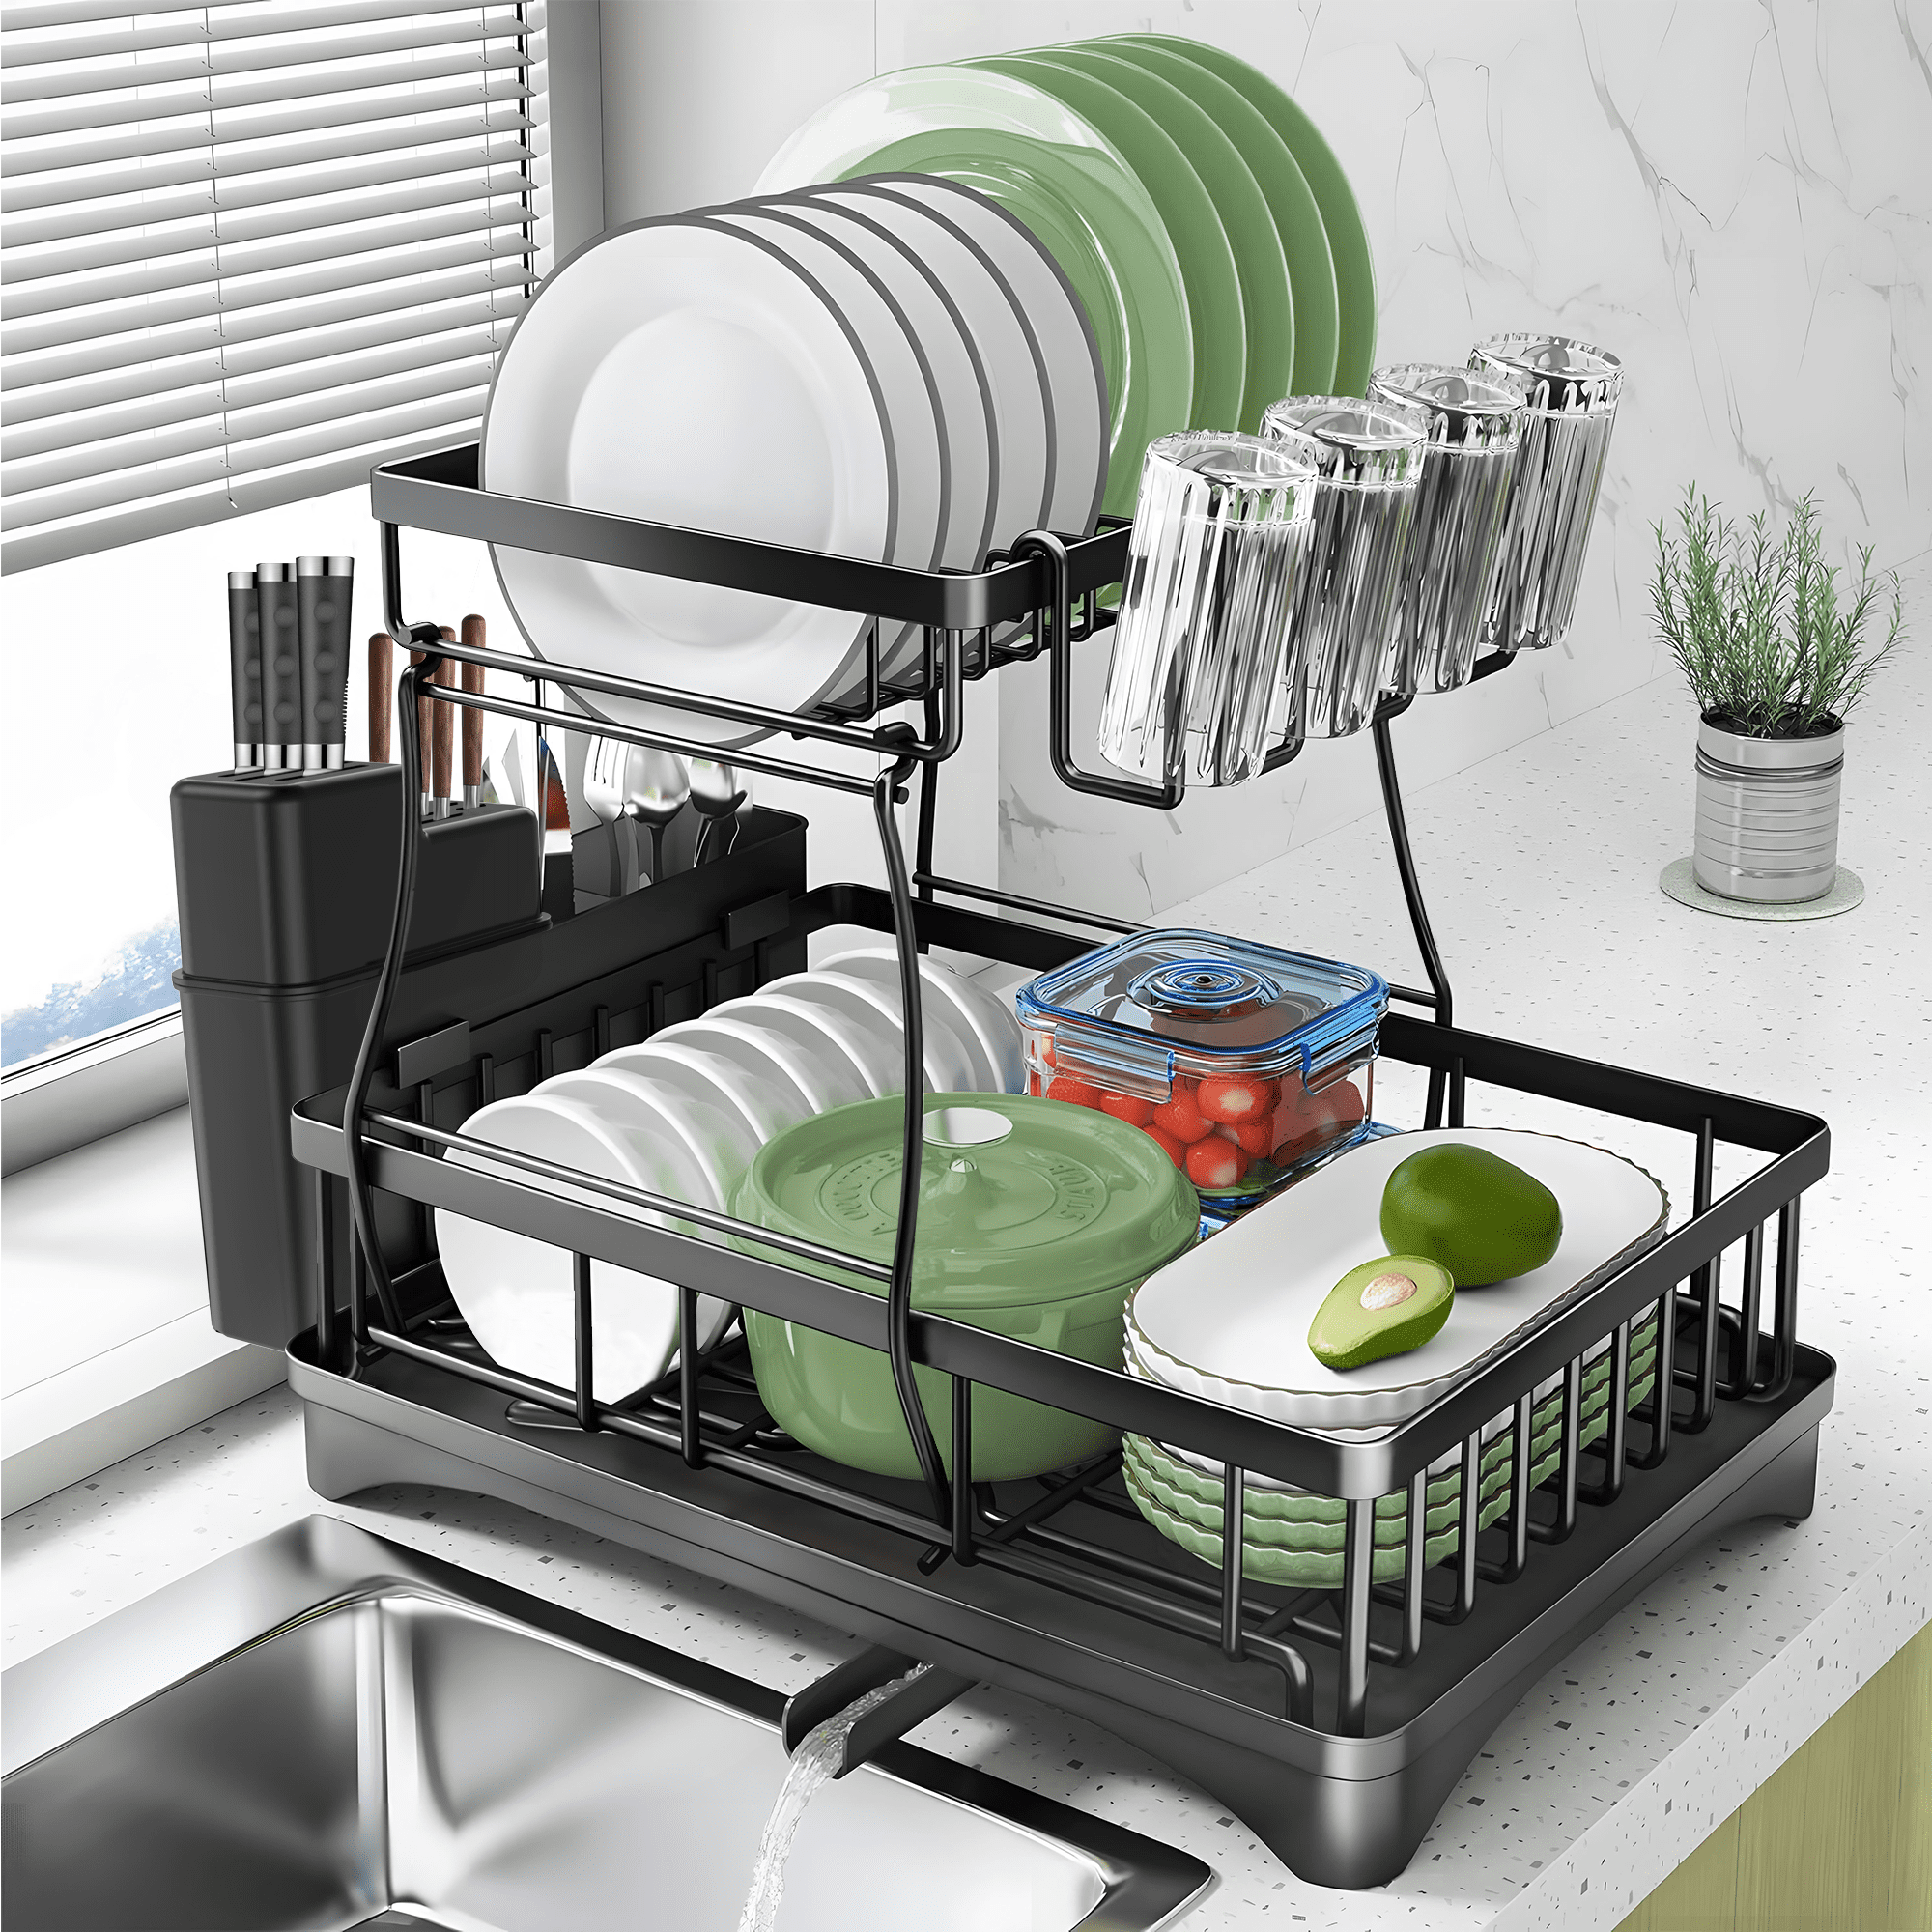 taotronics-shop Large Dish Drying Rack with Drainboard, 2 Tier Stainless Steel Drying Racks for Kitchen Counter